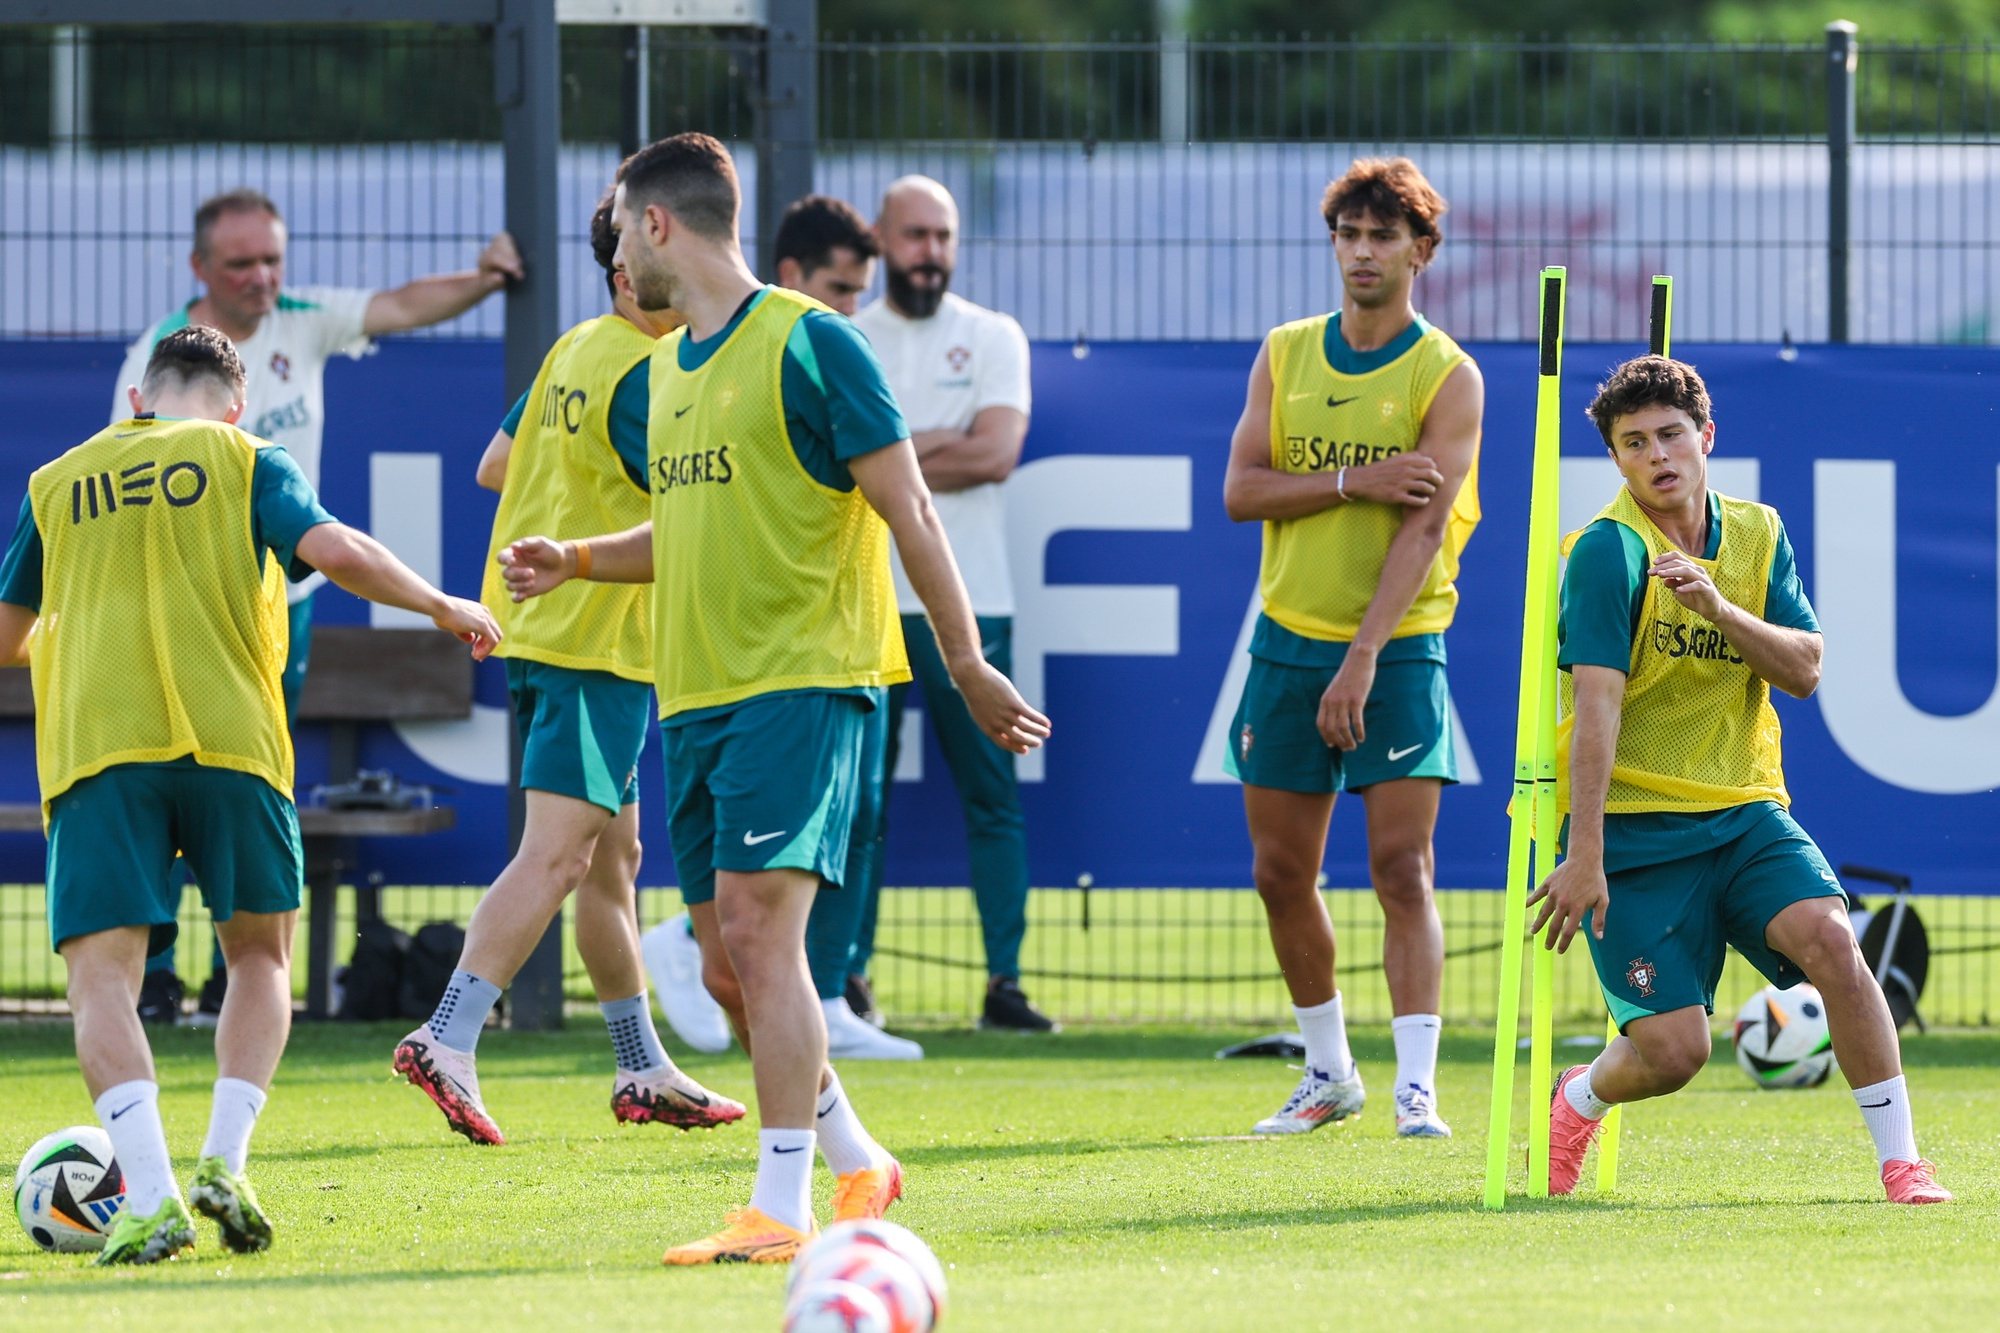 Portugal national soccer team player Joao Neves (R) during a training session in Marienfeld, Harsewinkel, Germany, 24 June 2024. The Portuguese national soccer team is based in Marienfeld, Harsewinkel during the UEFA EURO 2024. MIGUEL A. LOPES/LUSA